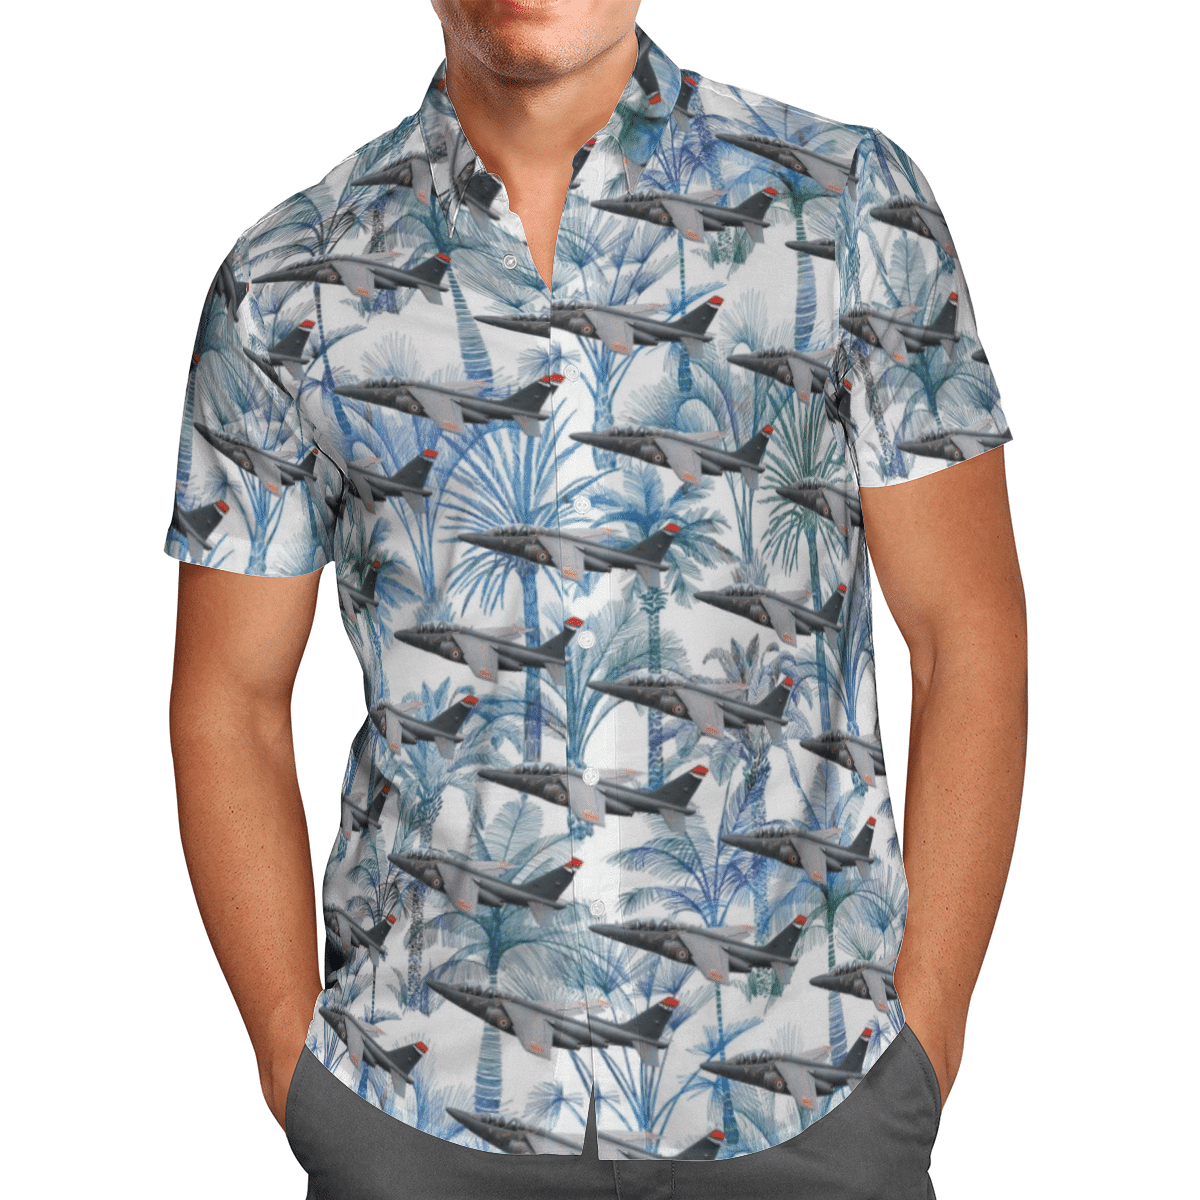 HOT Alpha Jet French Air Force All Over Print Tropical Shirt1